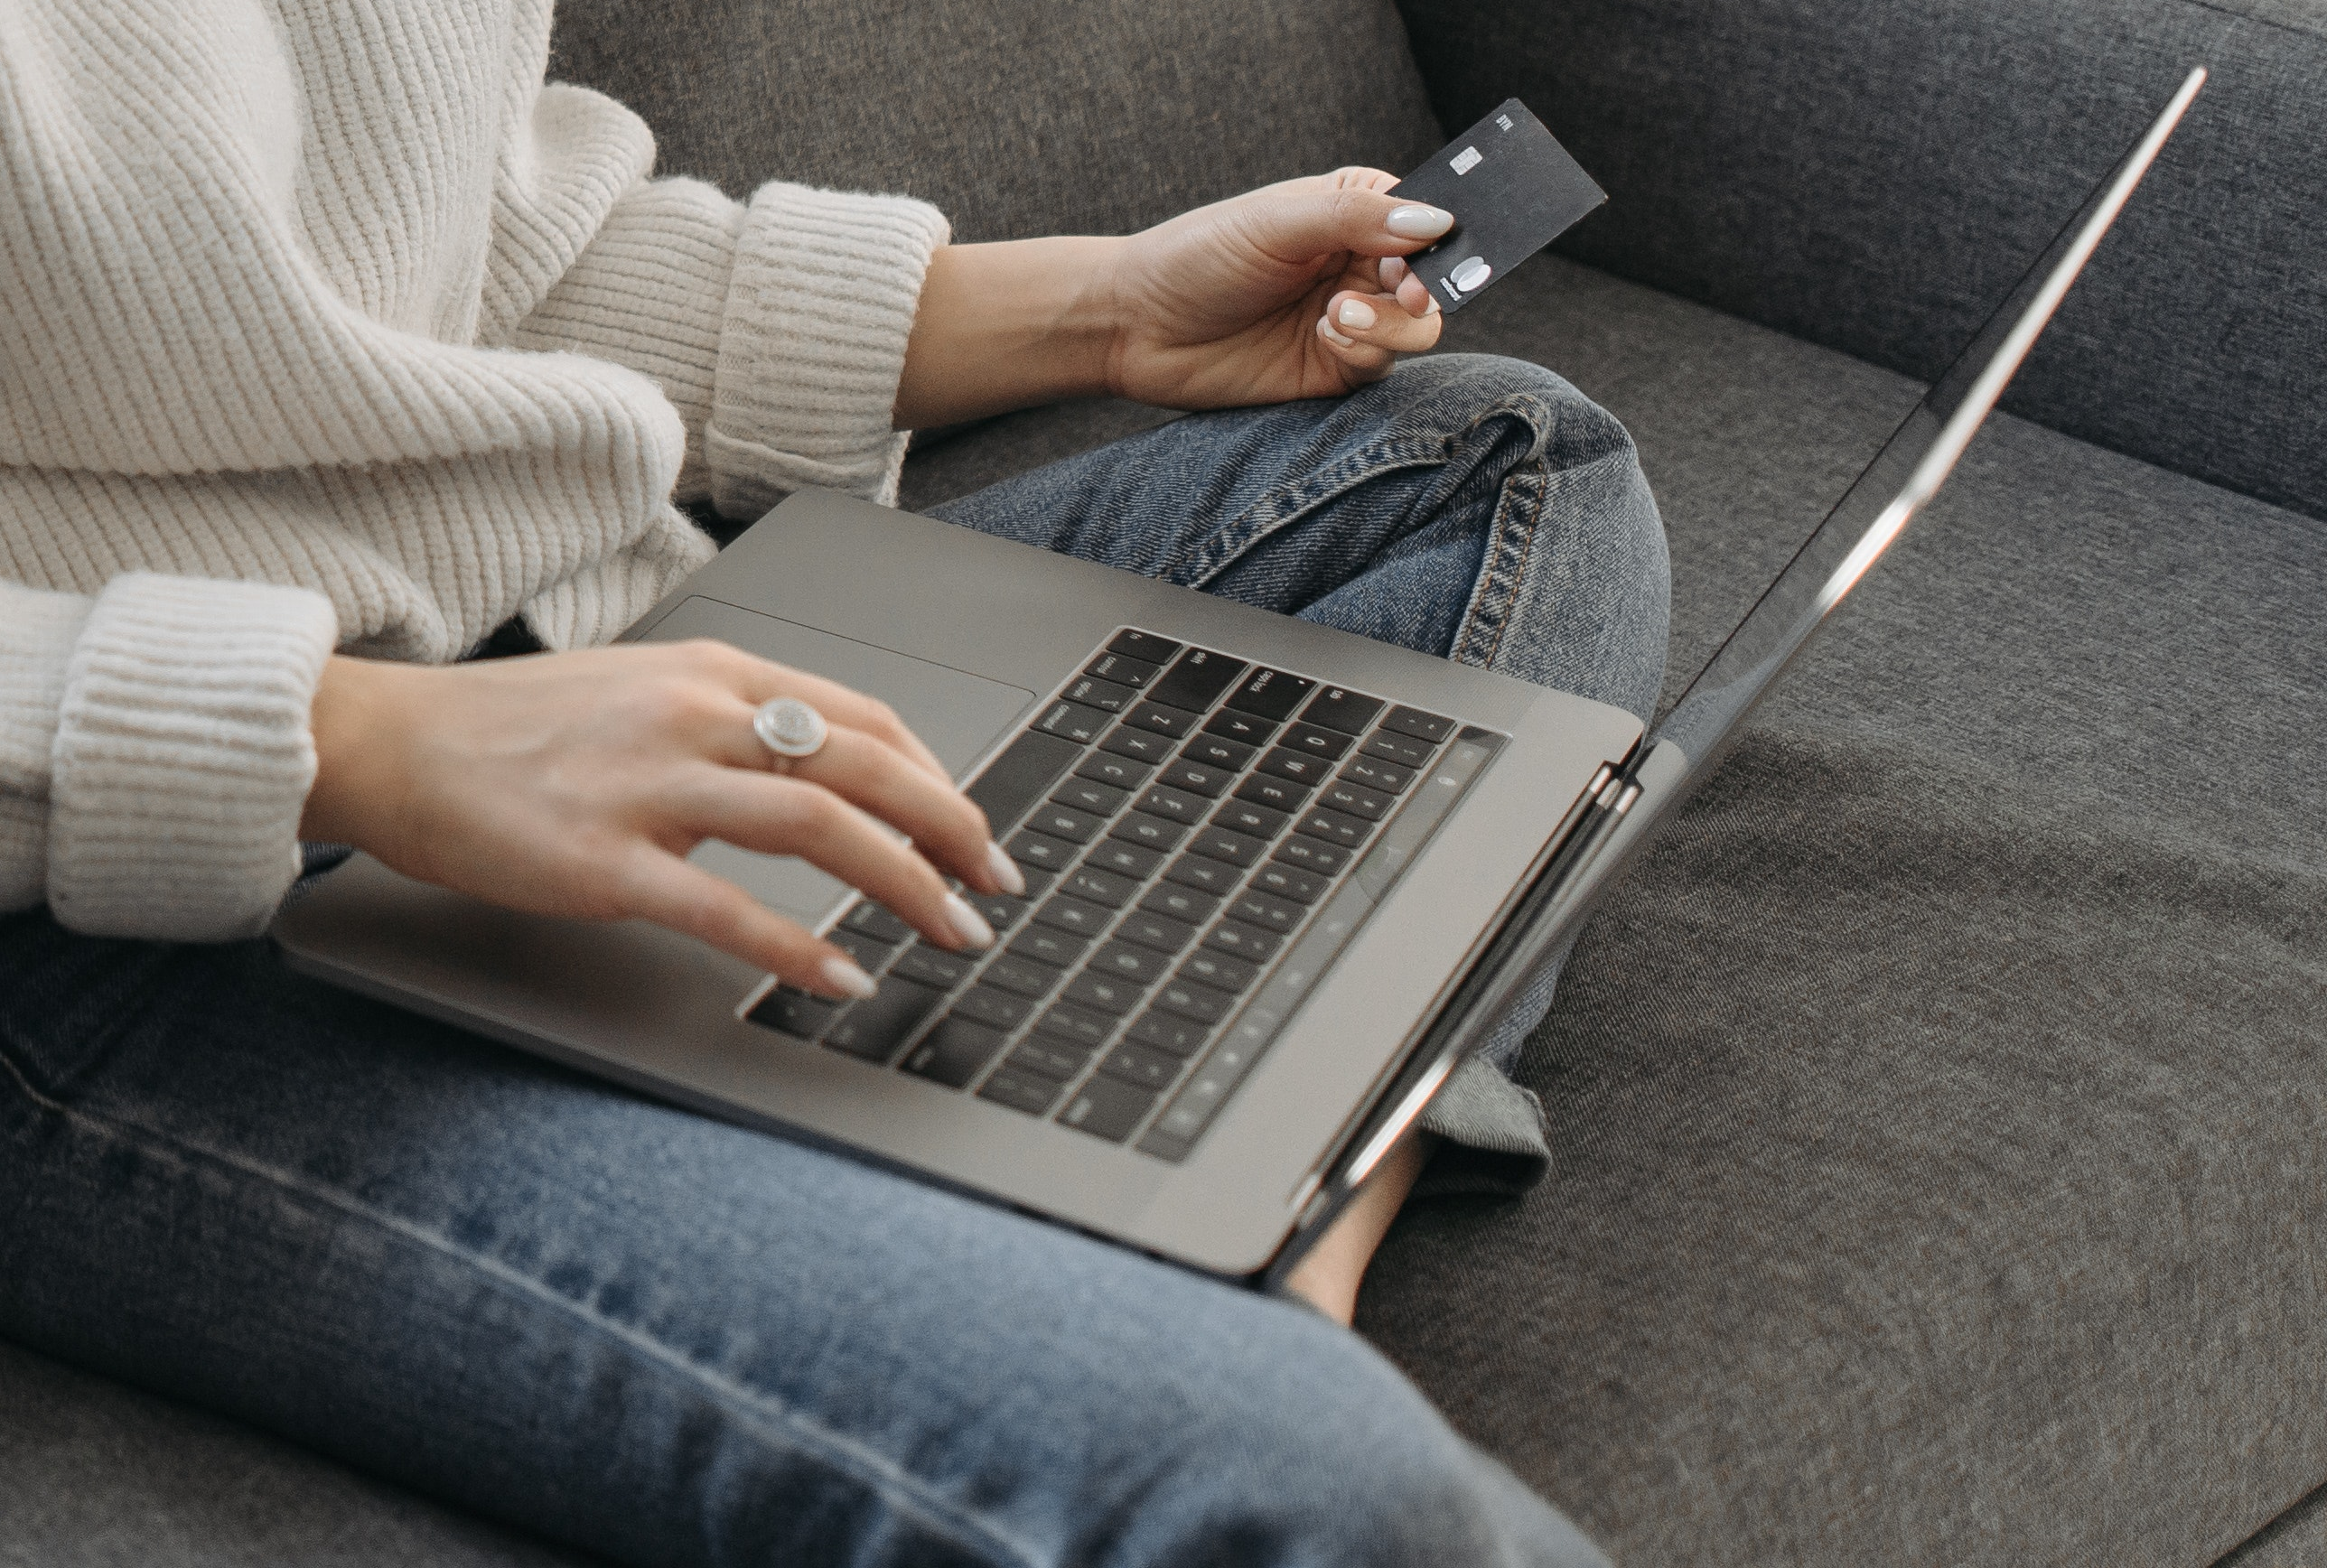 See how to apply online to get the Sam’s Club® Mastercard® credit card. Source: Pexels.